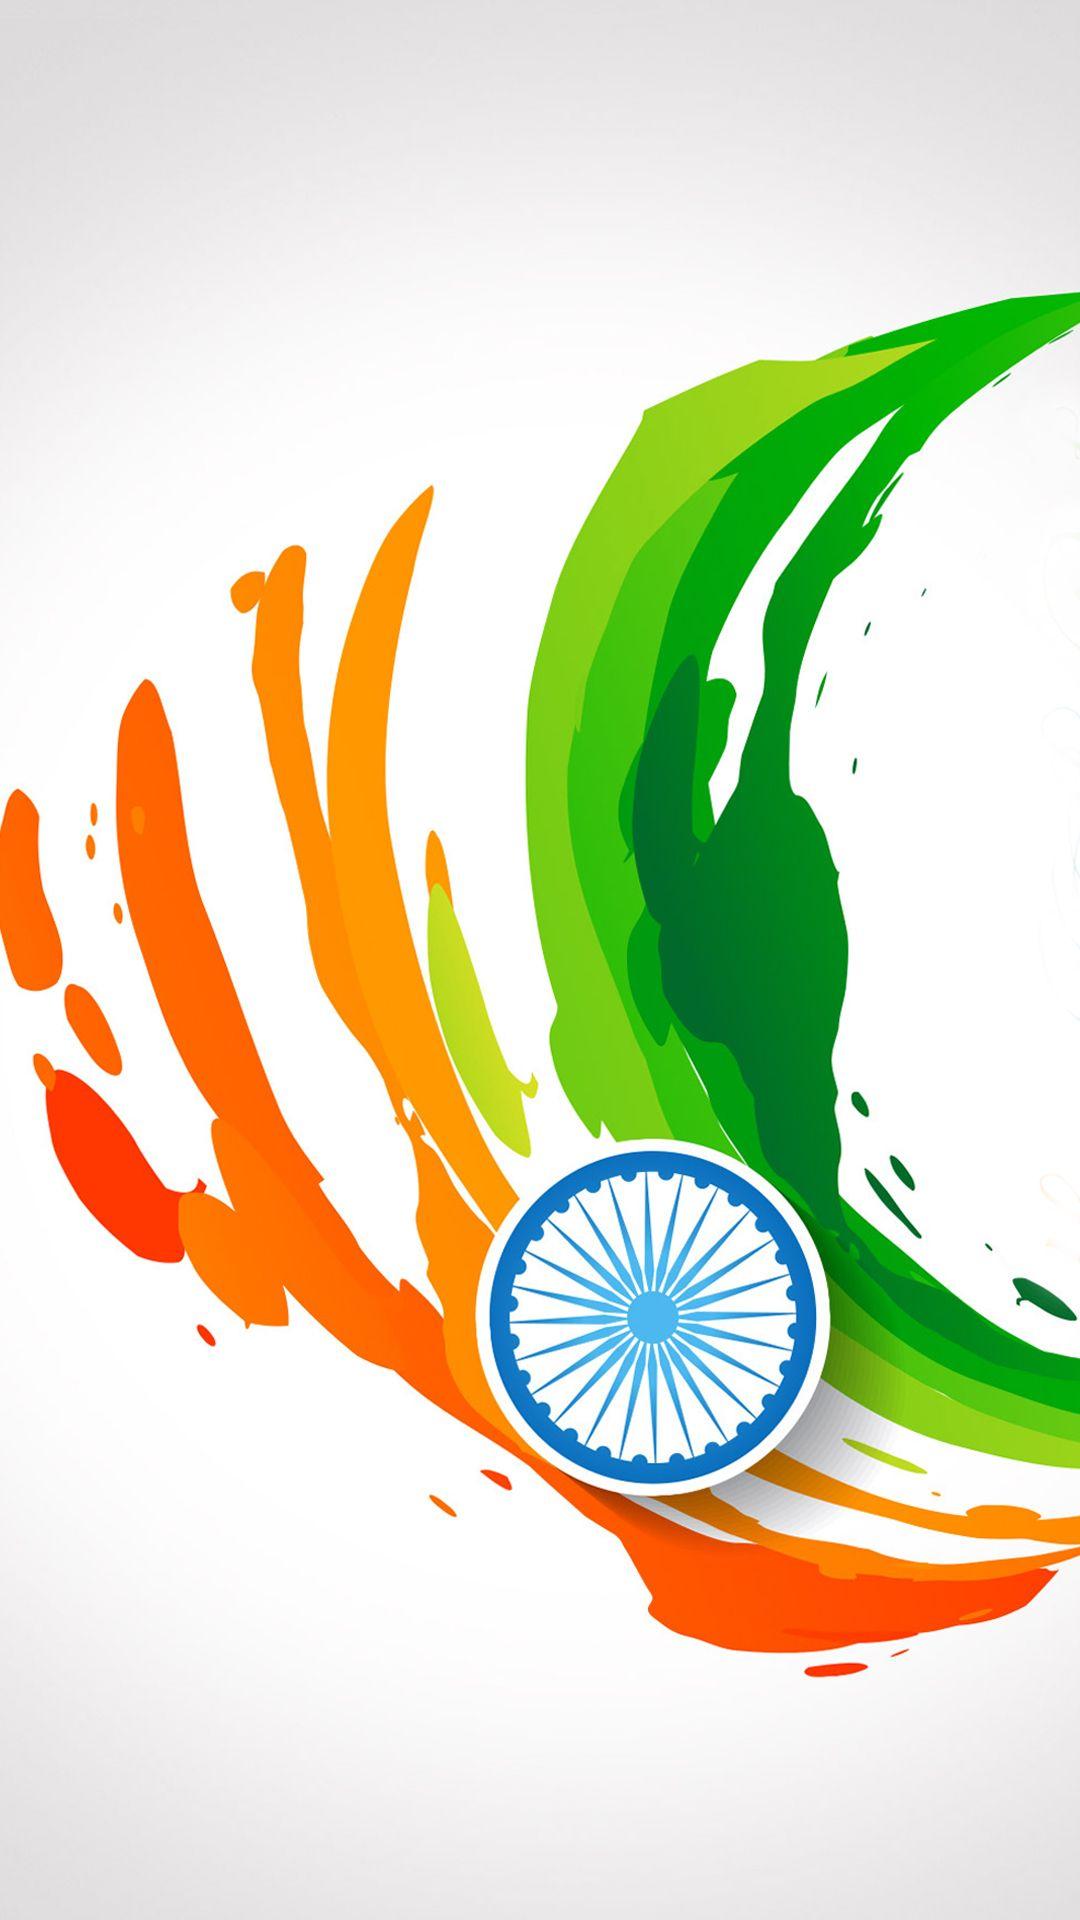 India Flag for Mobile Phone Wallpaper 14 of 17 Tricolour